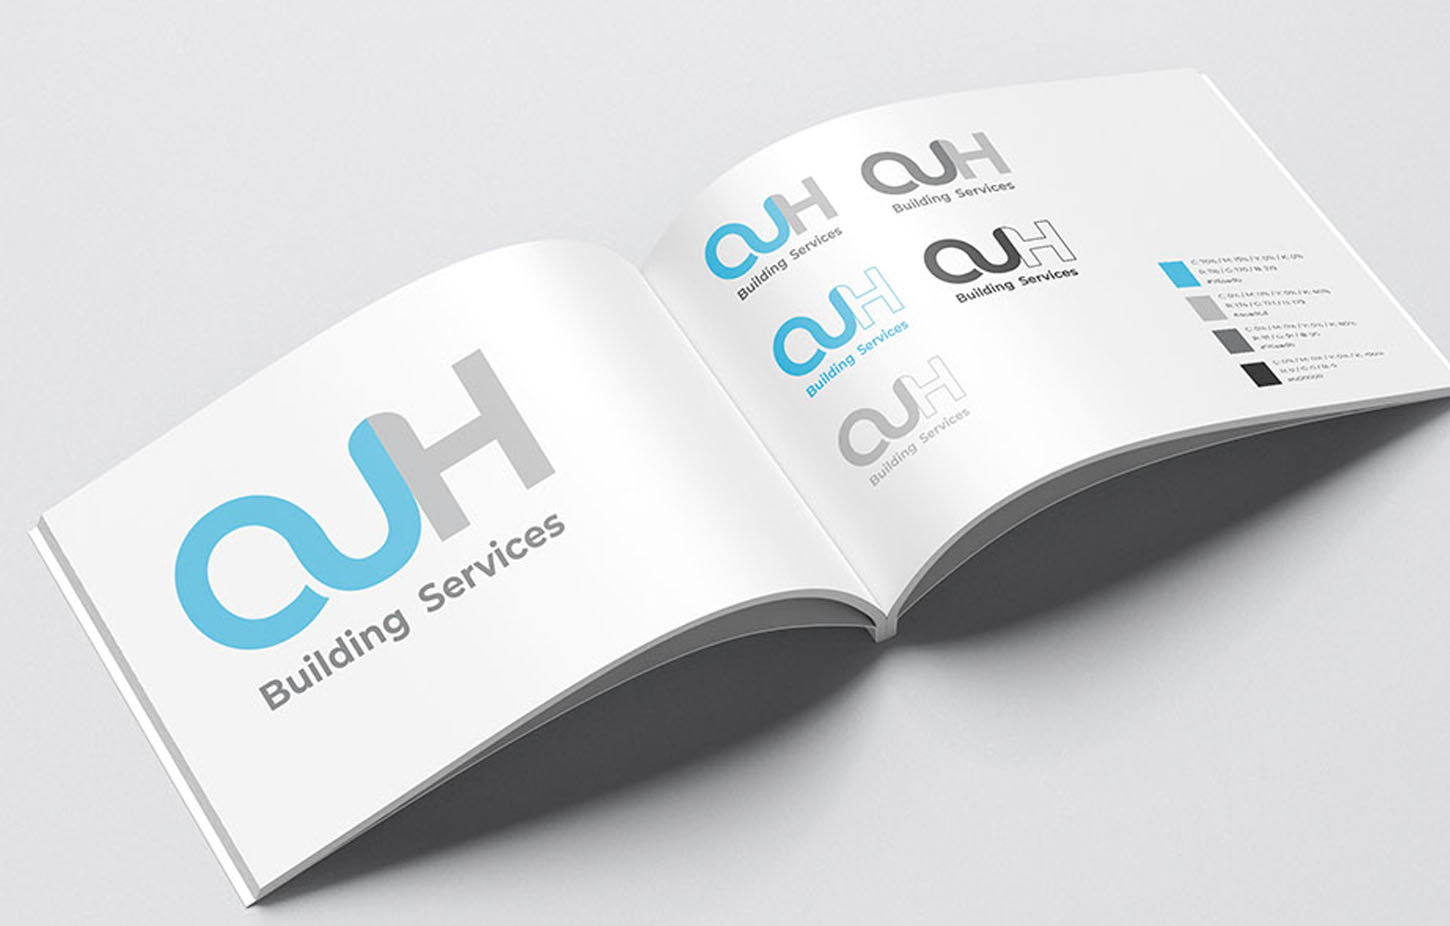 OUH Building Services